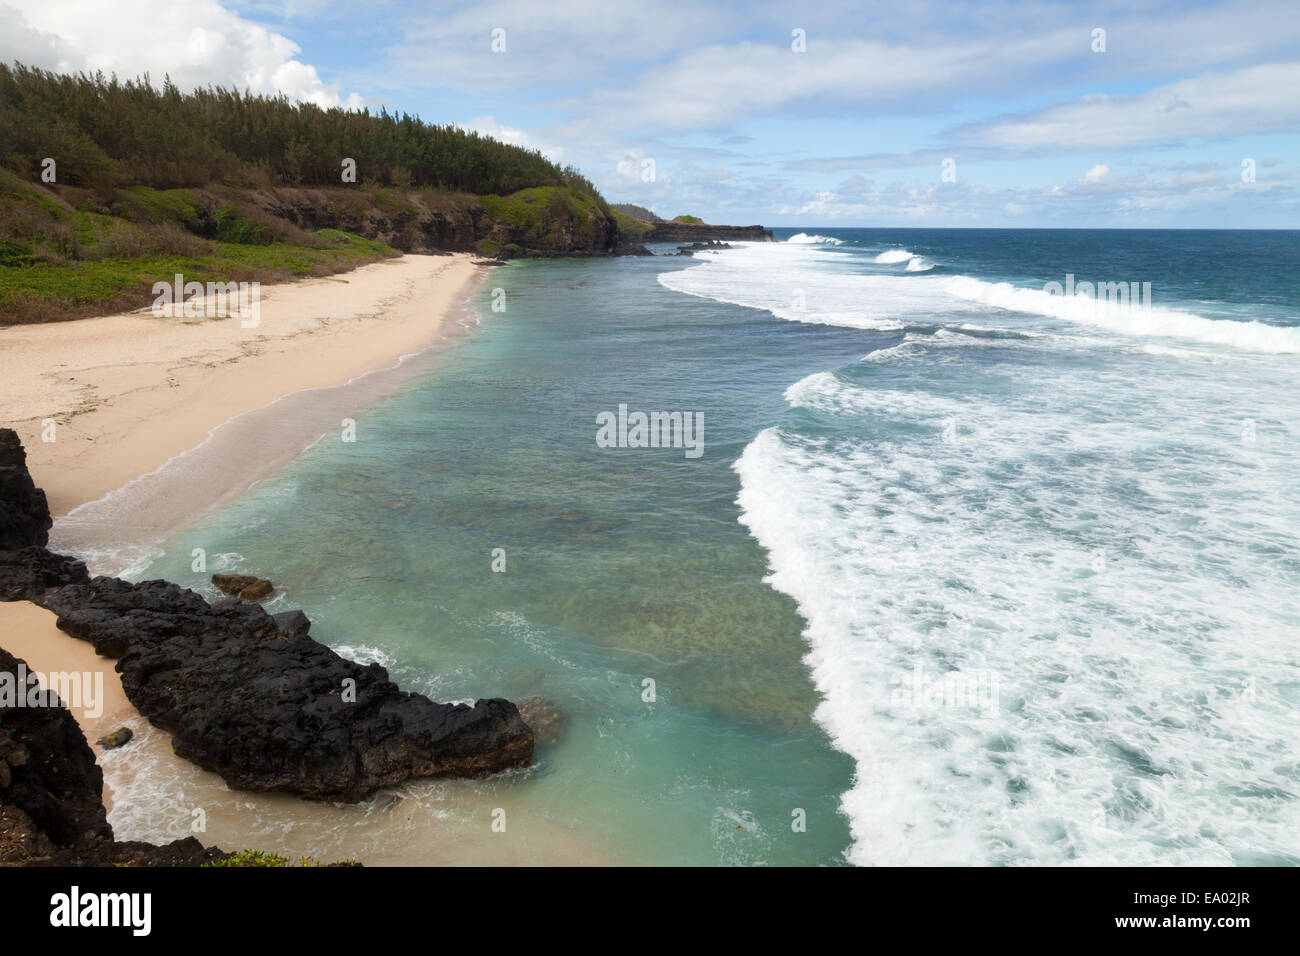 The beach and rocky coastline at Le Gris Gris, the southernmost point of Mauritius Stock Photo